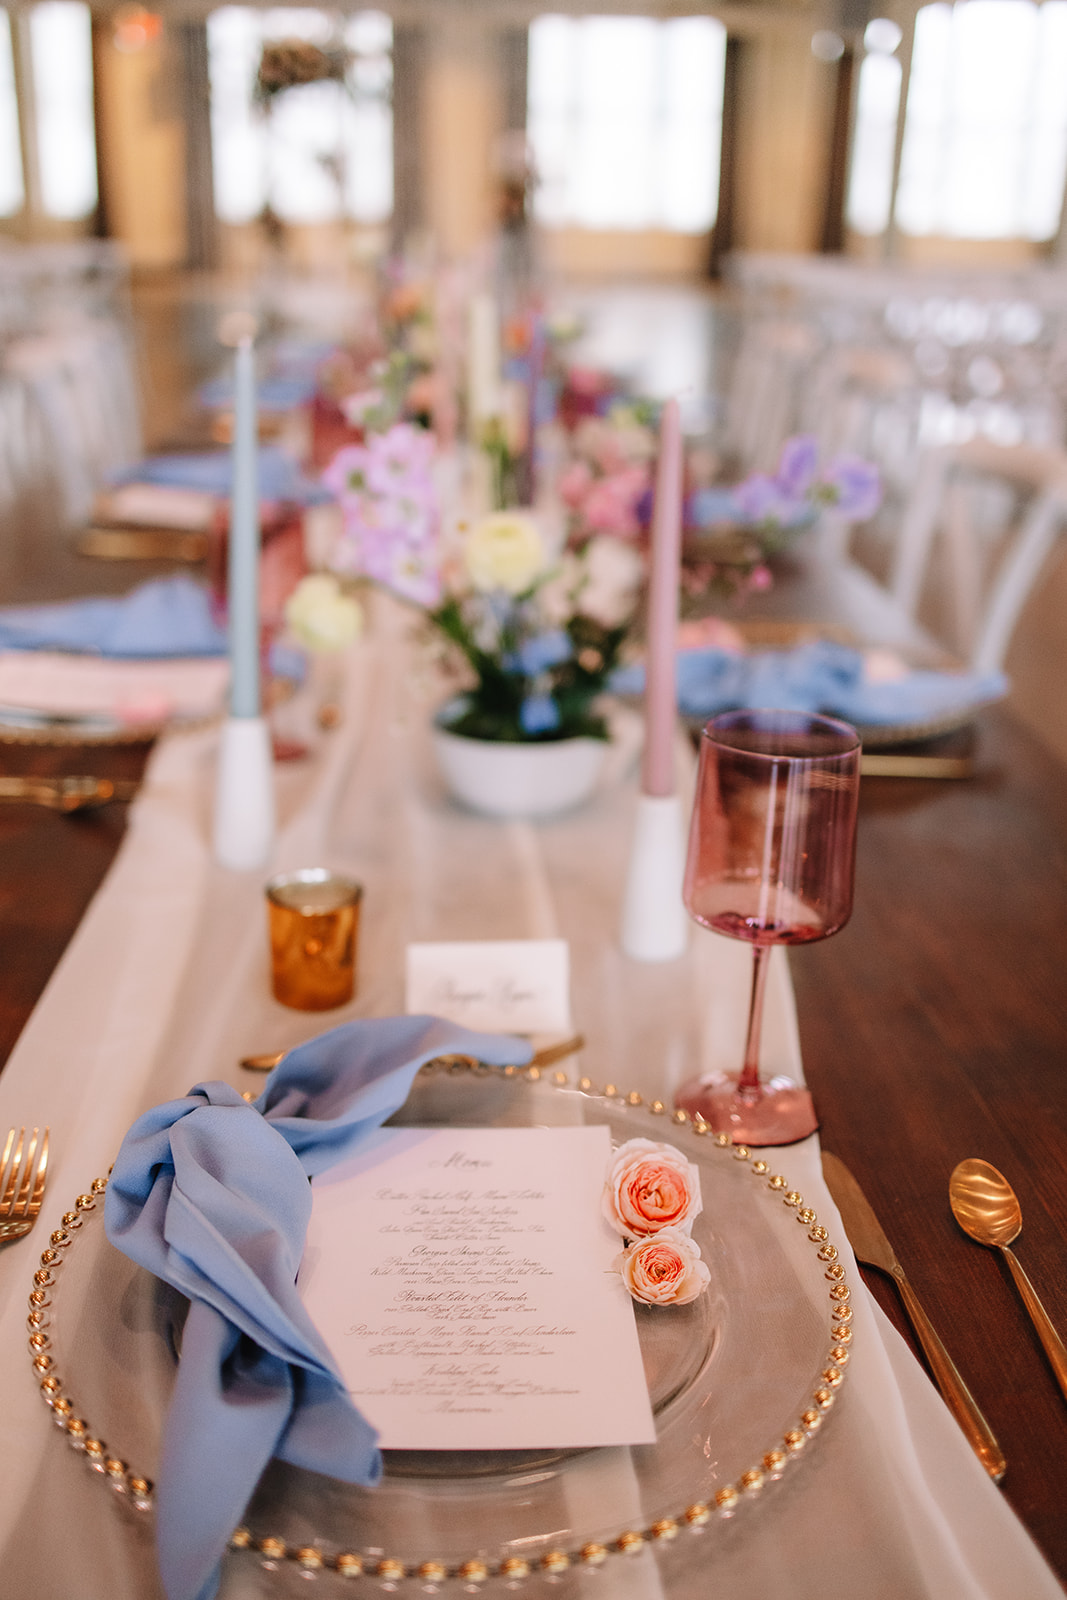 A table setting with a clear glass plate, a blue cloth napkin, a menu, a pink wine glass, and small pink roses. The table features pink and purple flower arrangements and pink and blue candles.